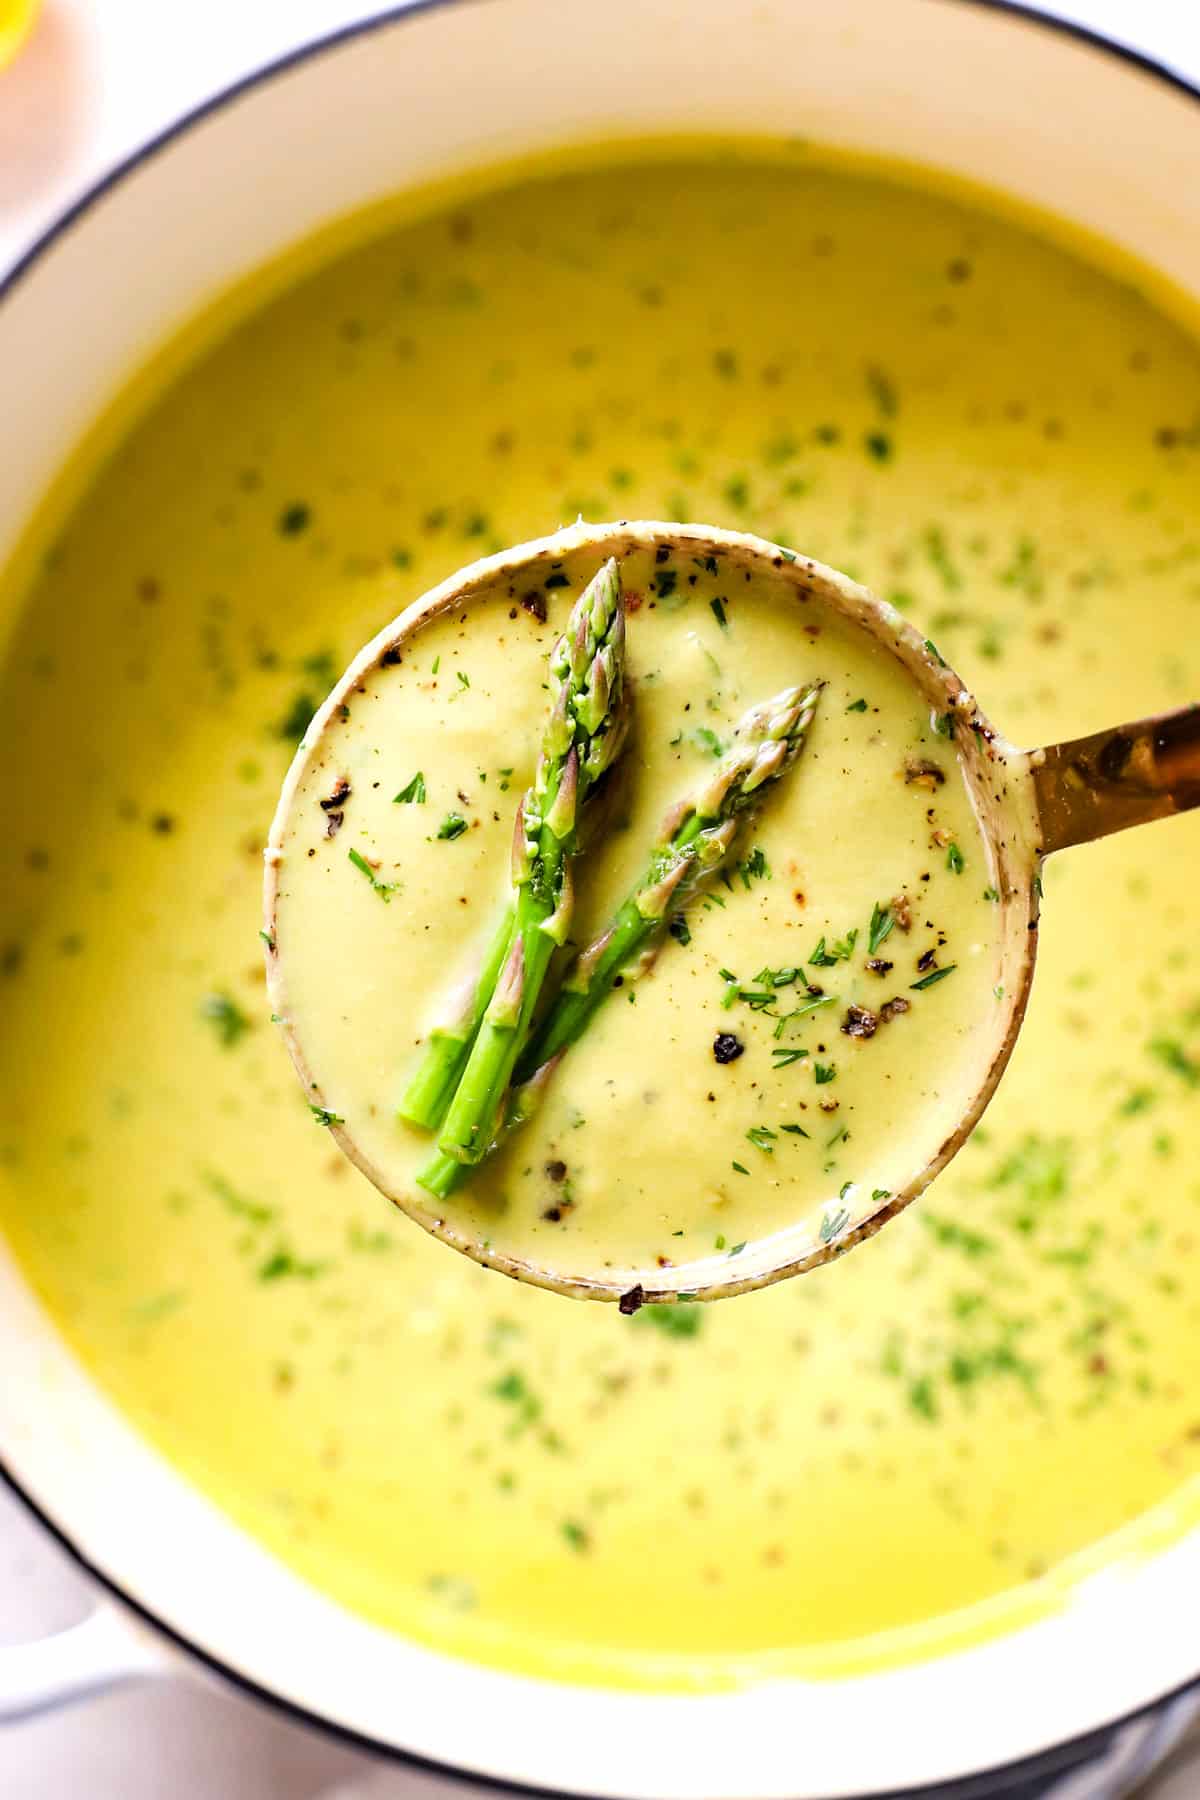 scooping up a ladle of Cream of Asparagus Soup recipe showing how creamy it is